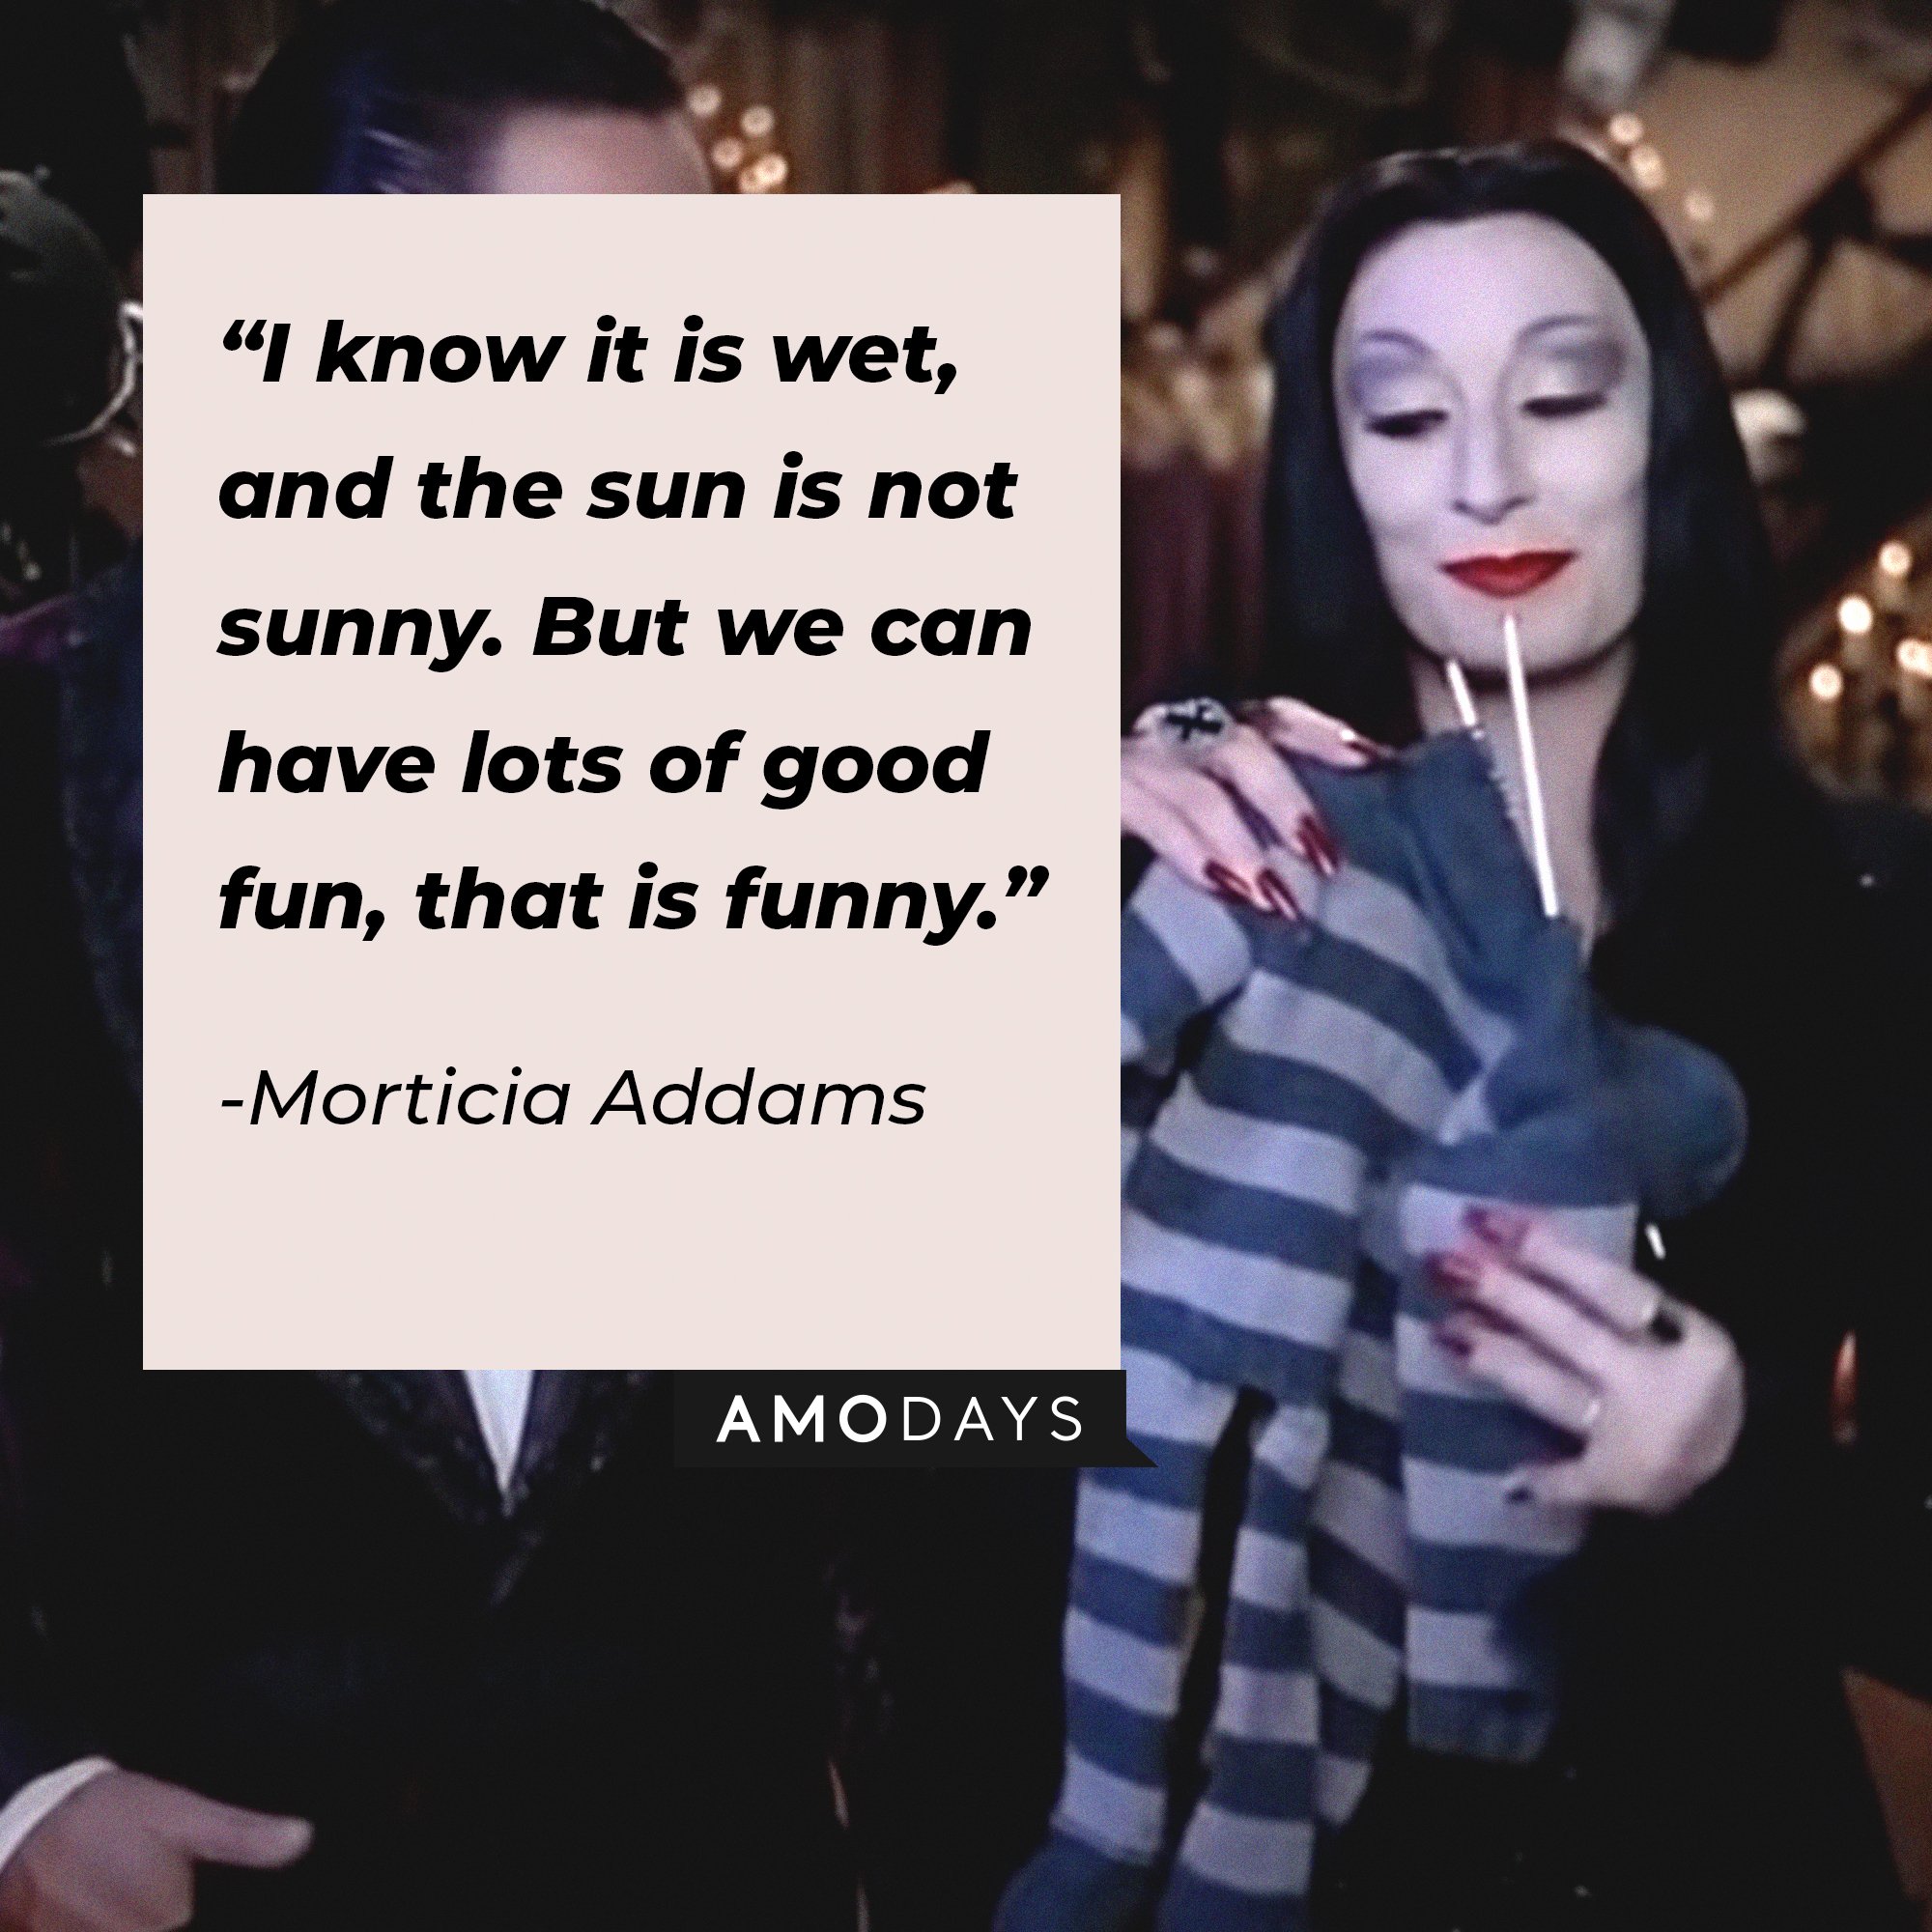 Morticia Addams’ quote: “I know it is wet, and the sun is not sunny. But we can have lots of good fun, that is funny.” | Image: AmoDays